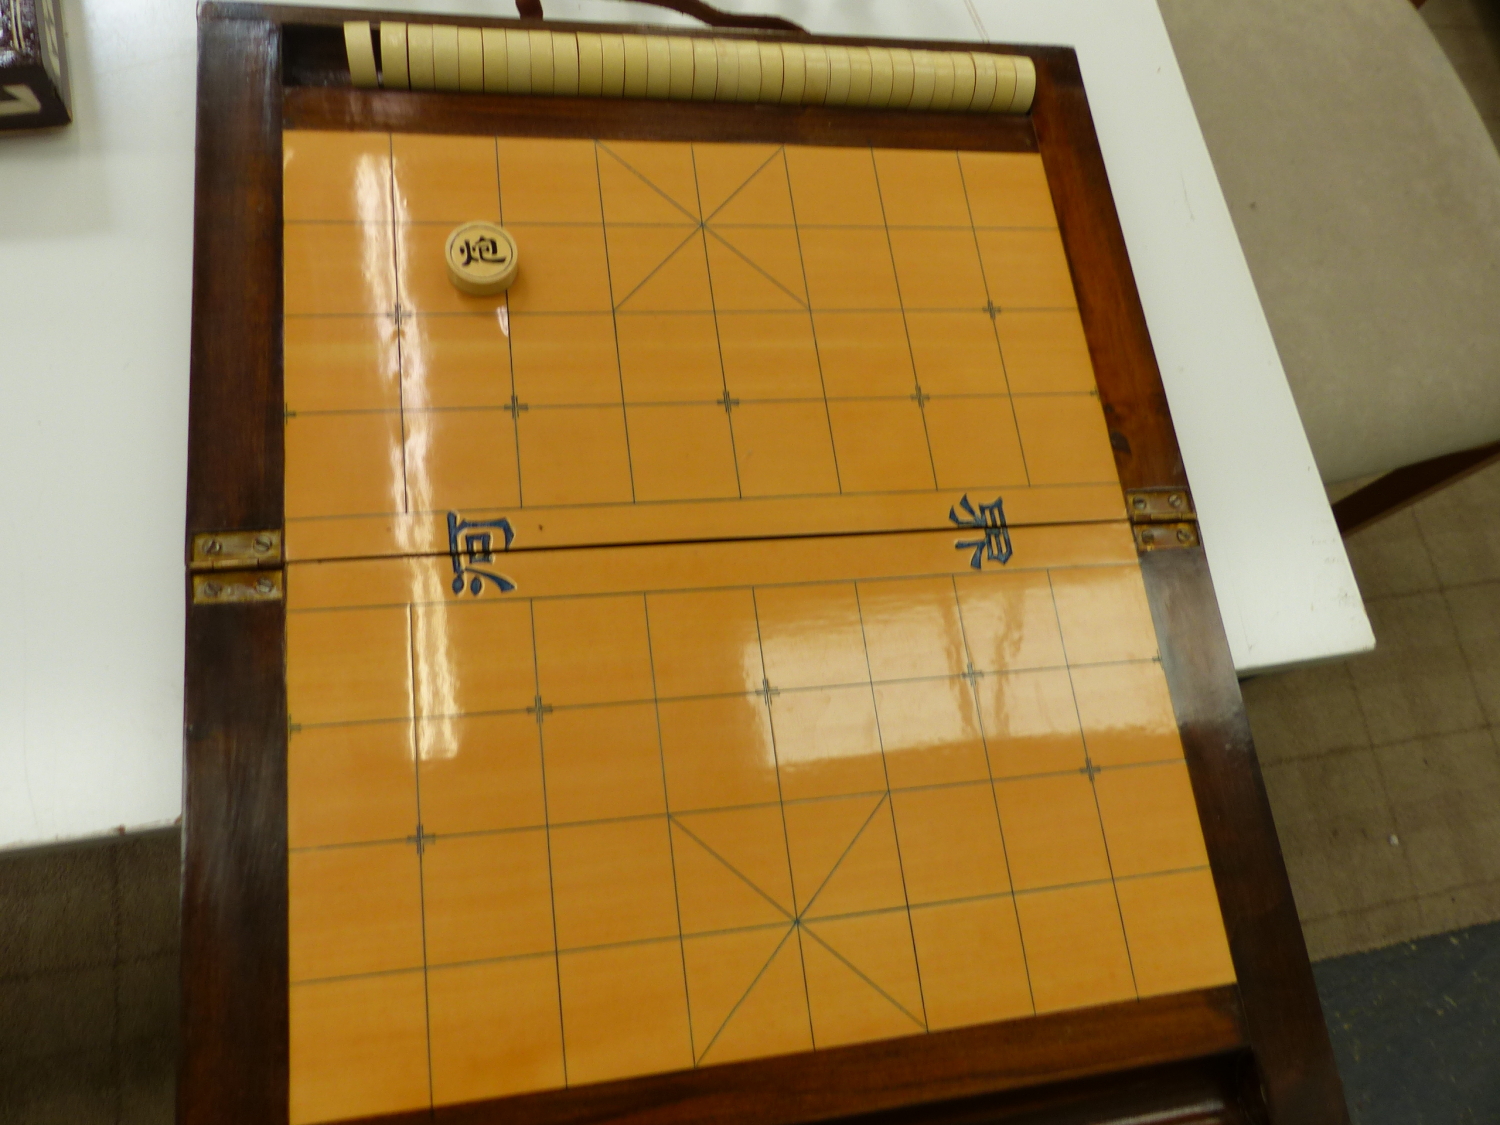 TWO GAMES BOARDS. - Image 12 of 12